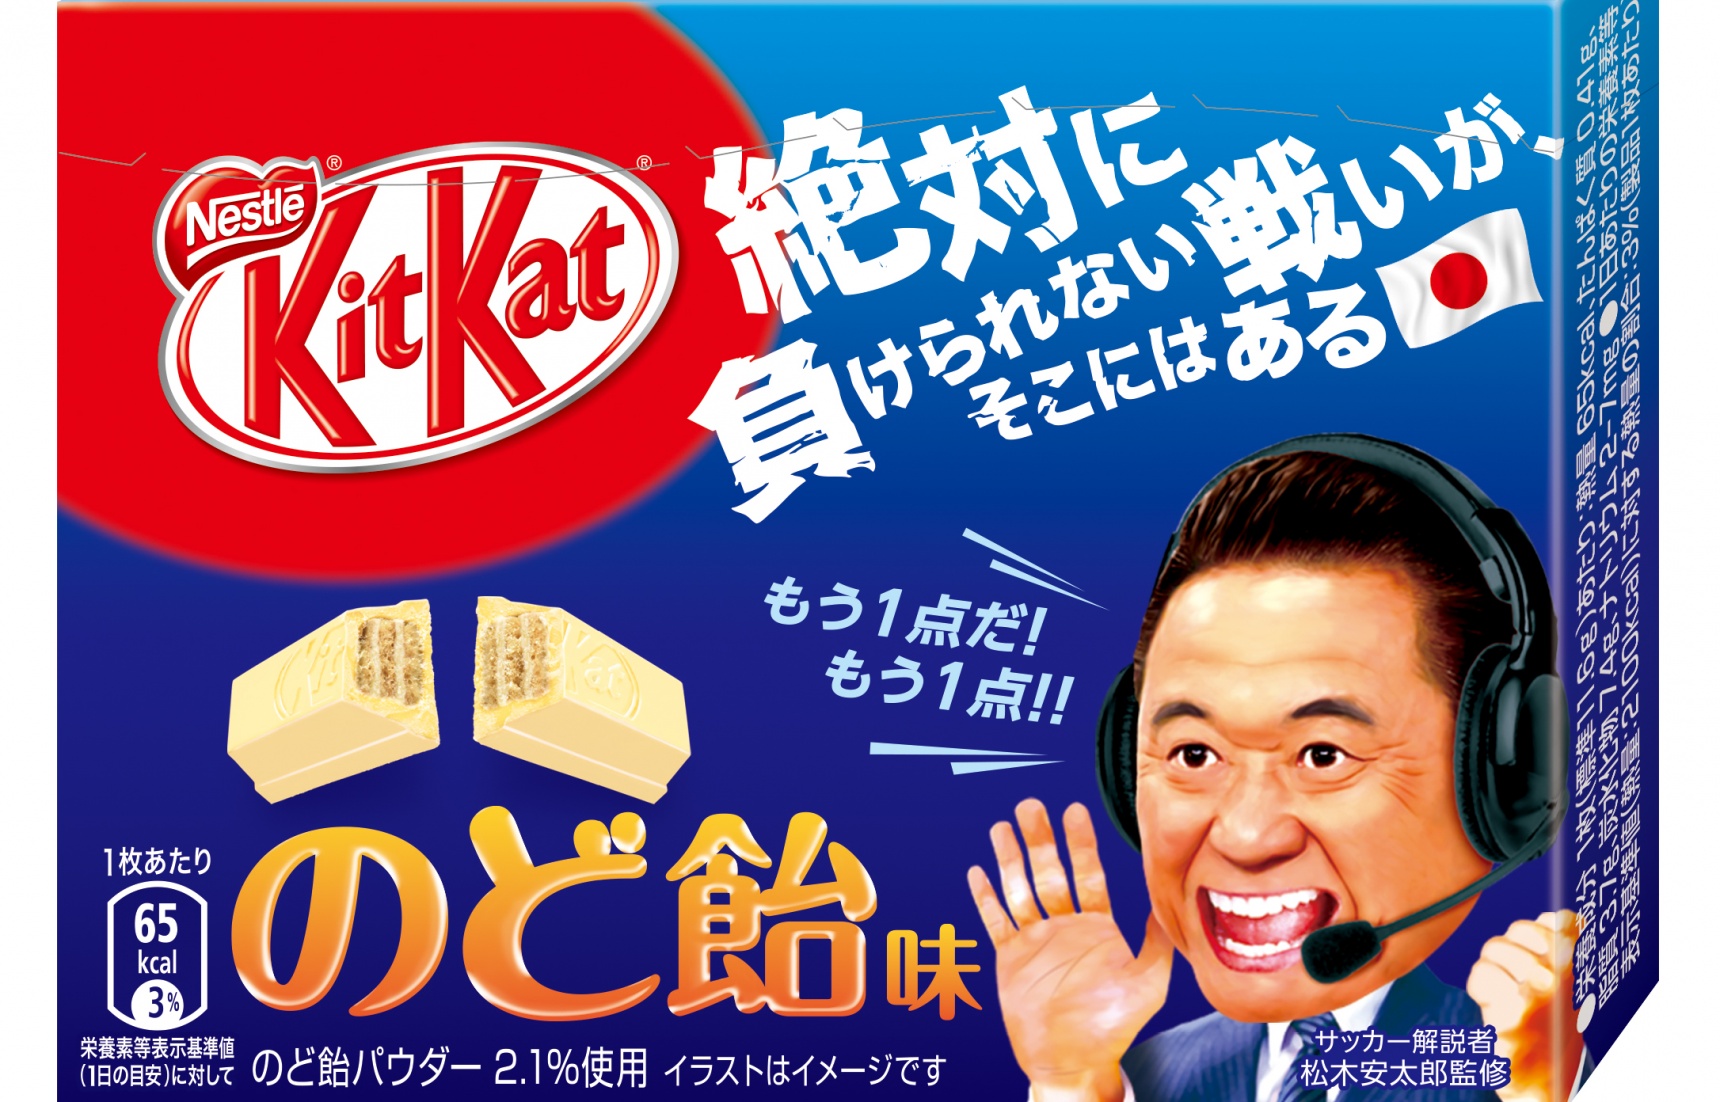 Soothe Your Throat With... a Kit Kat?!